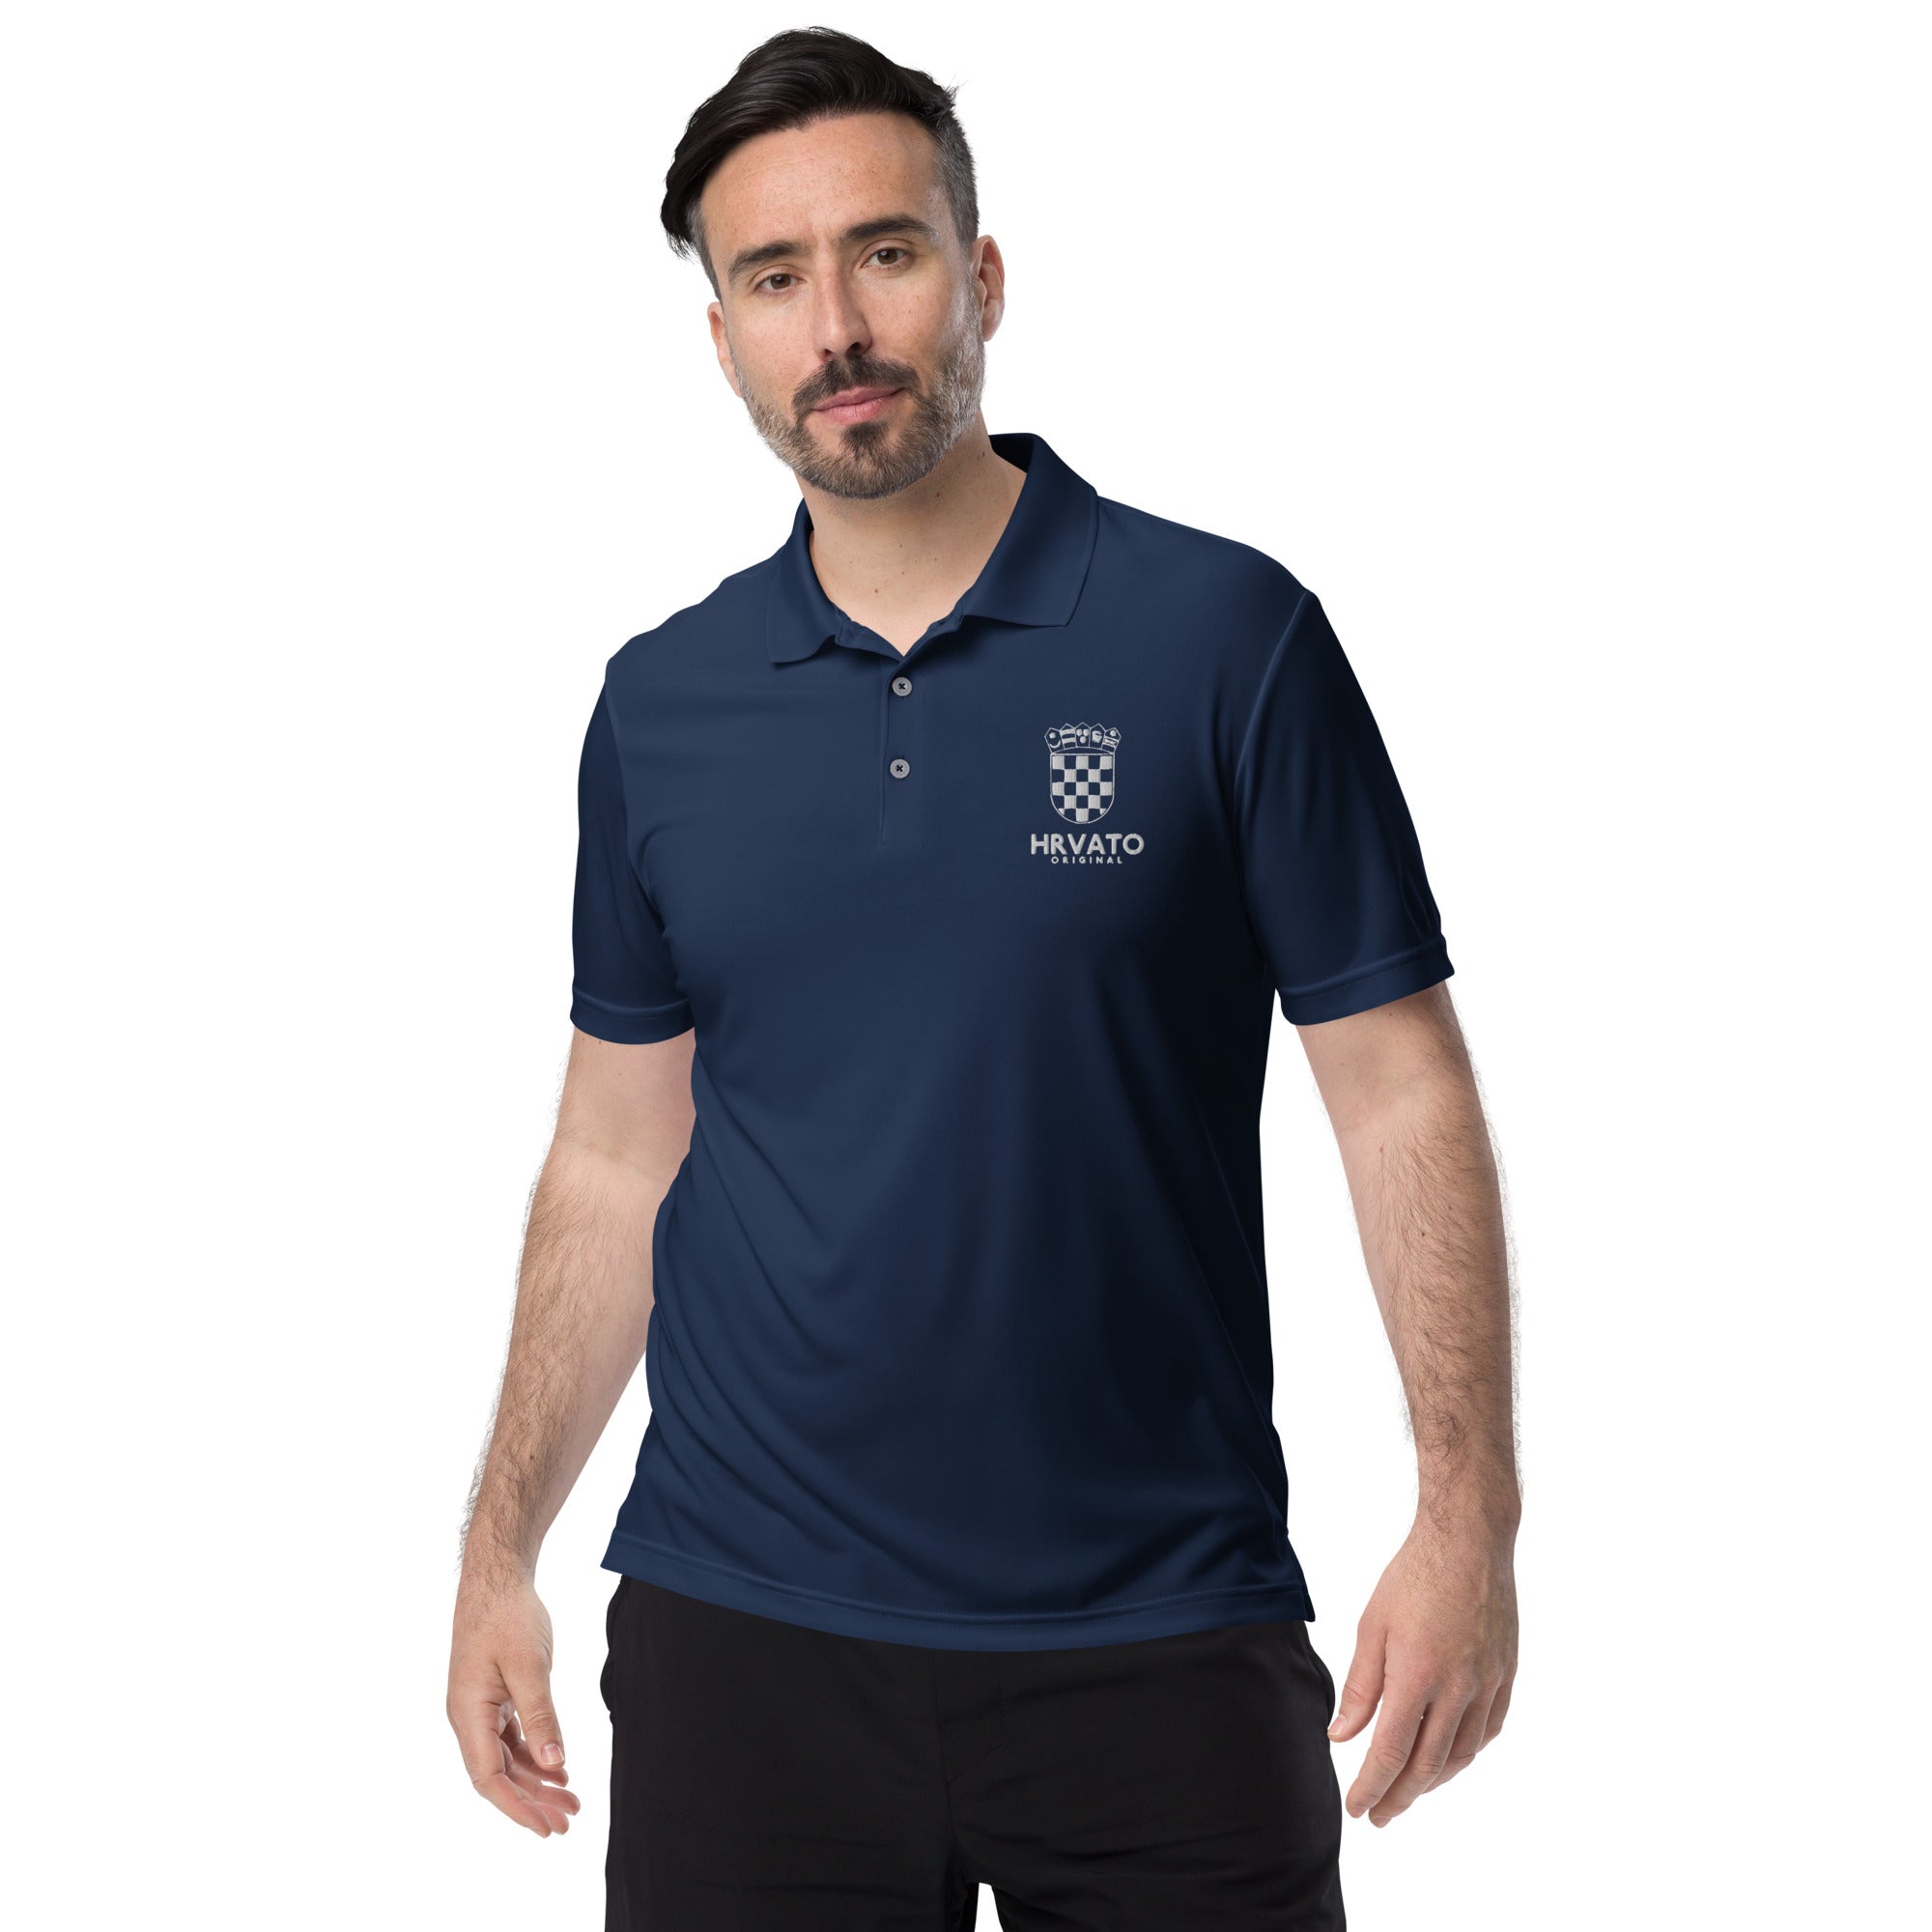 Adidas x Hrvato Polo Shirt with Croatian Coat of Arms Embroidery.